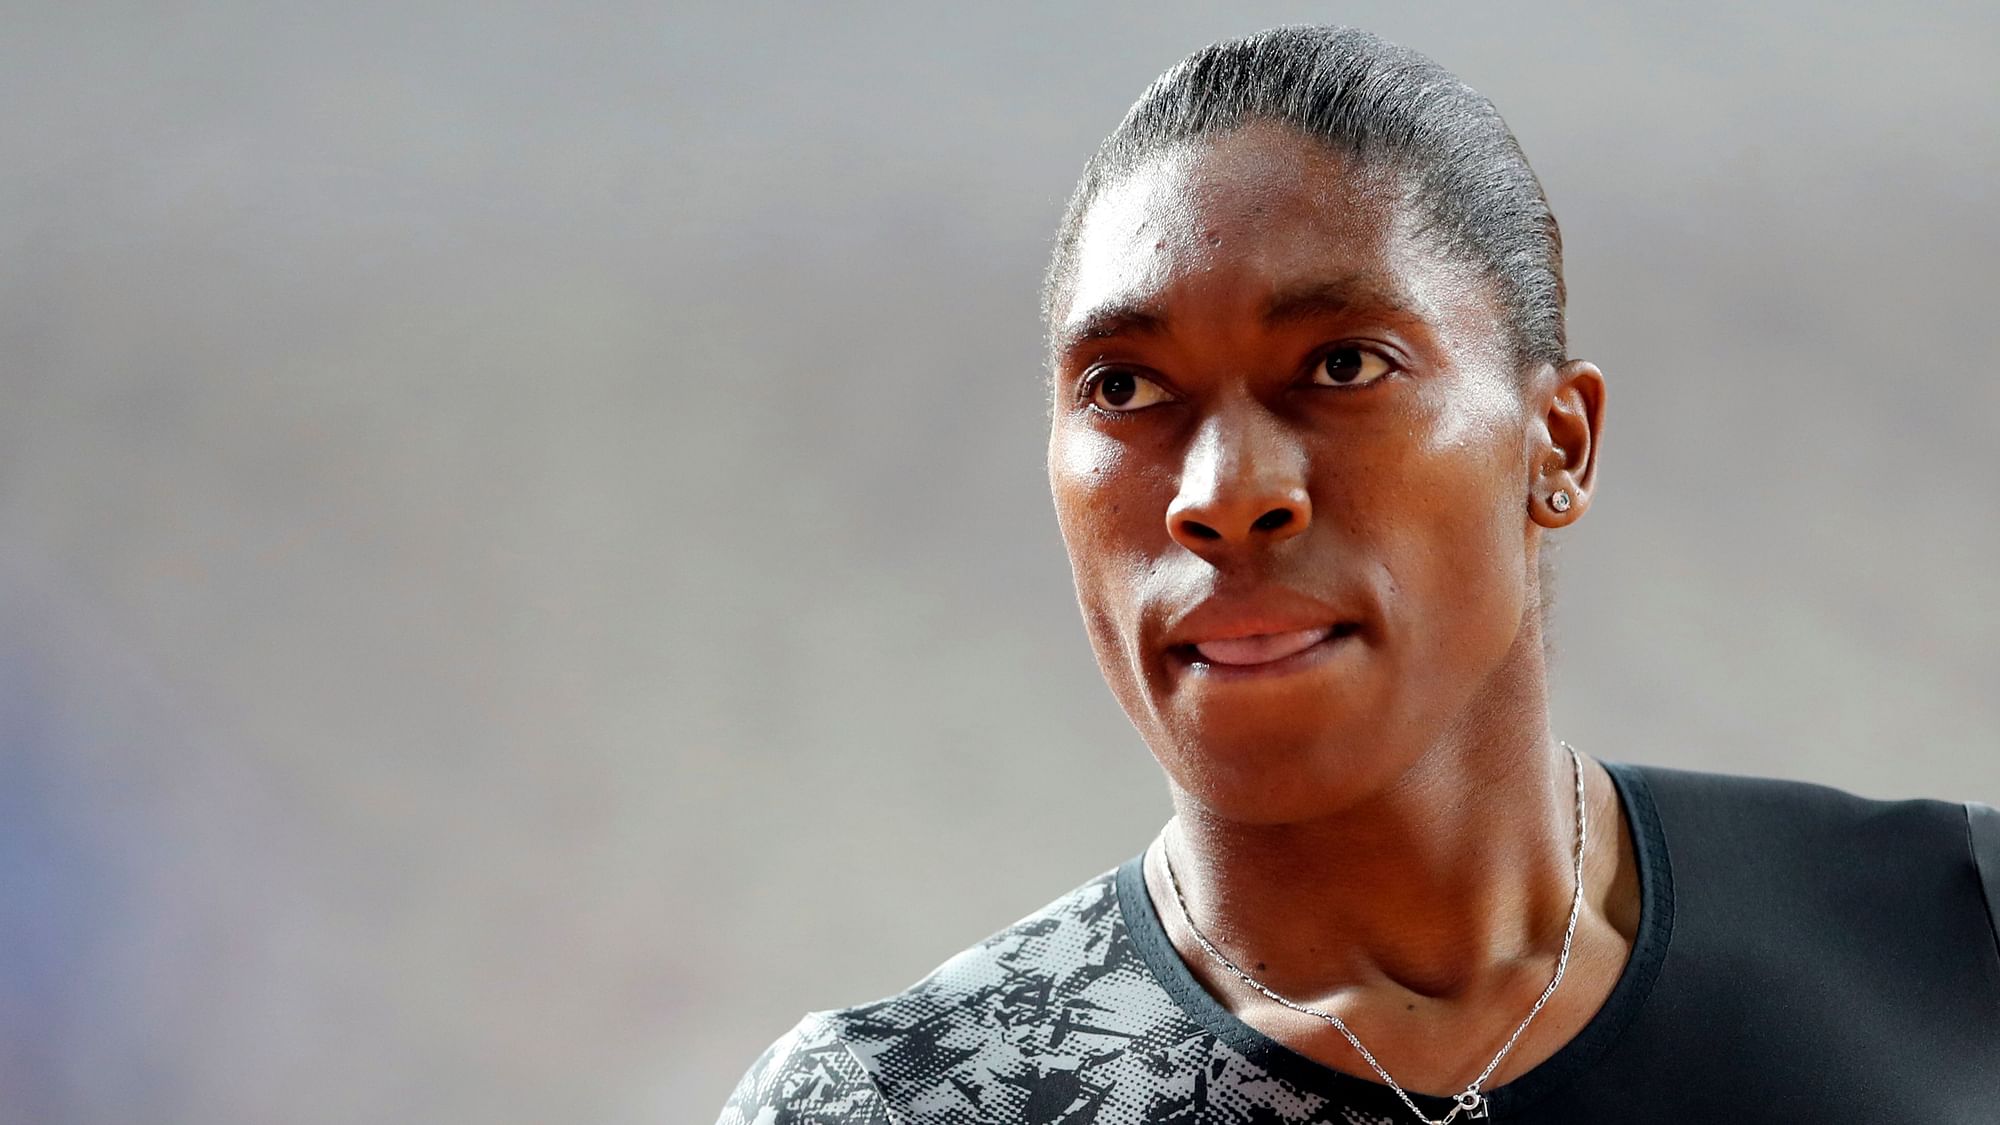 The governing body of track argued in court that Olympic champion Caster Semenya is “biologically male”.